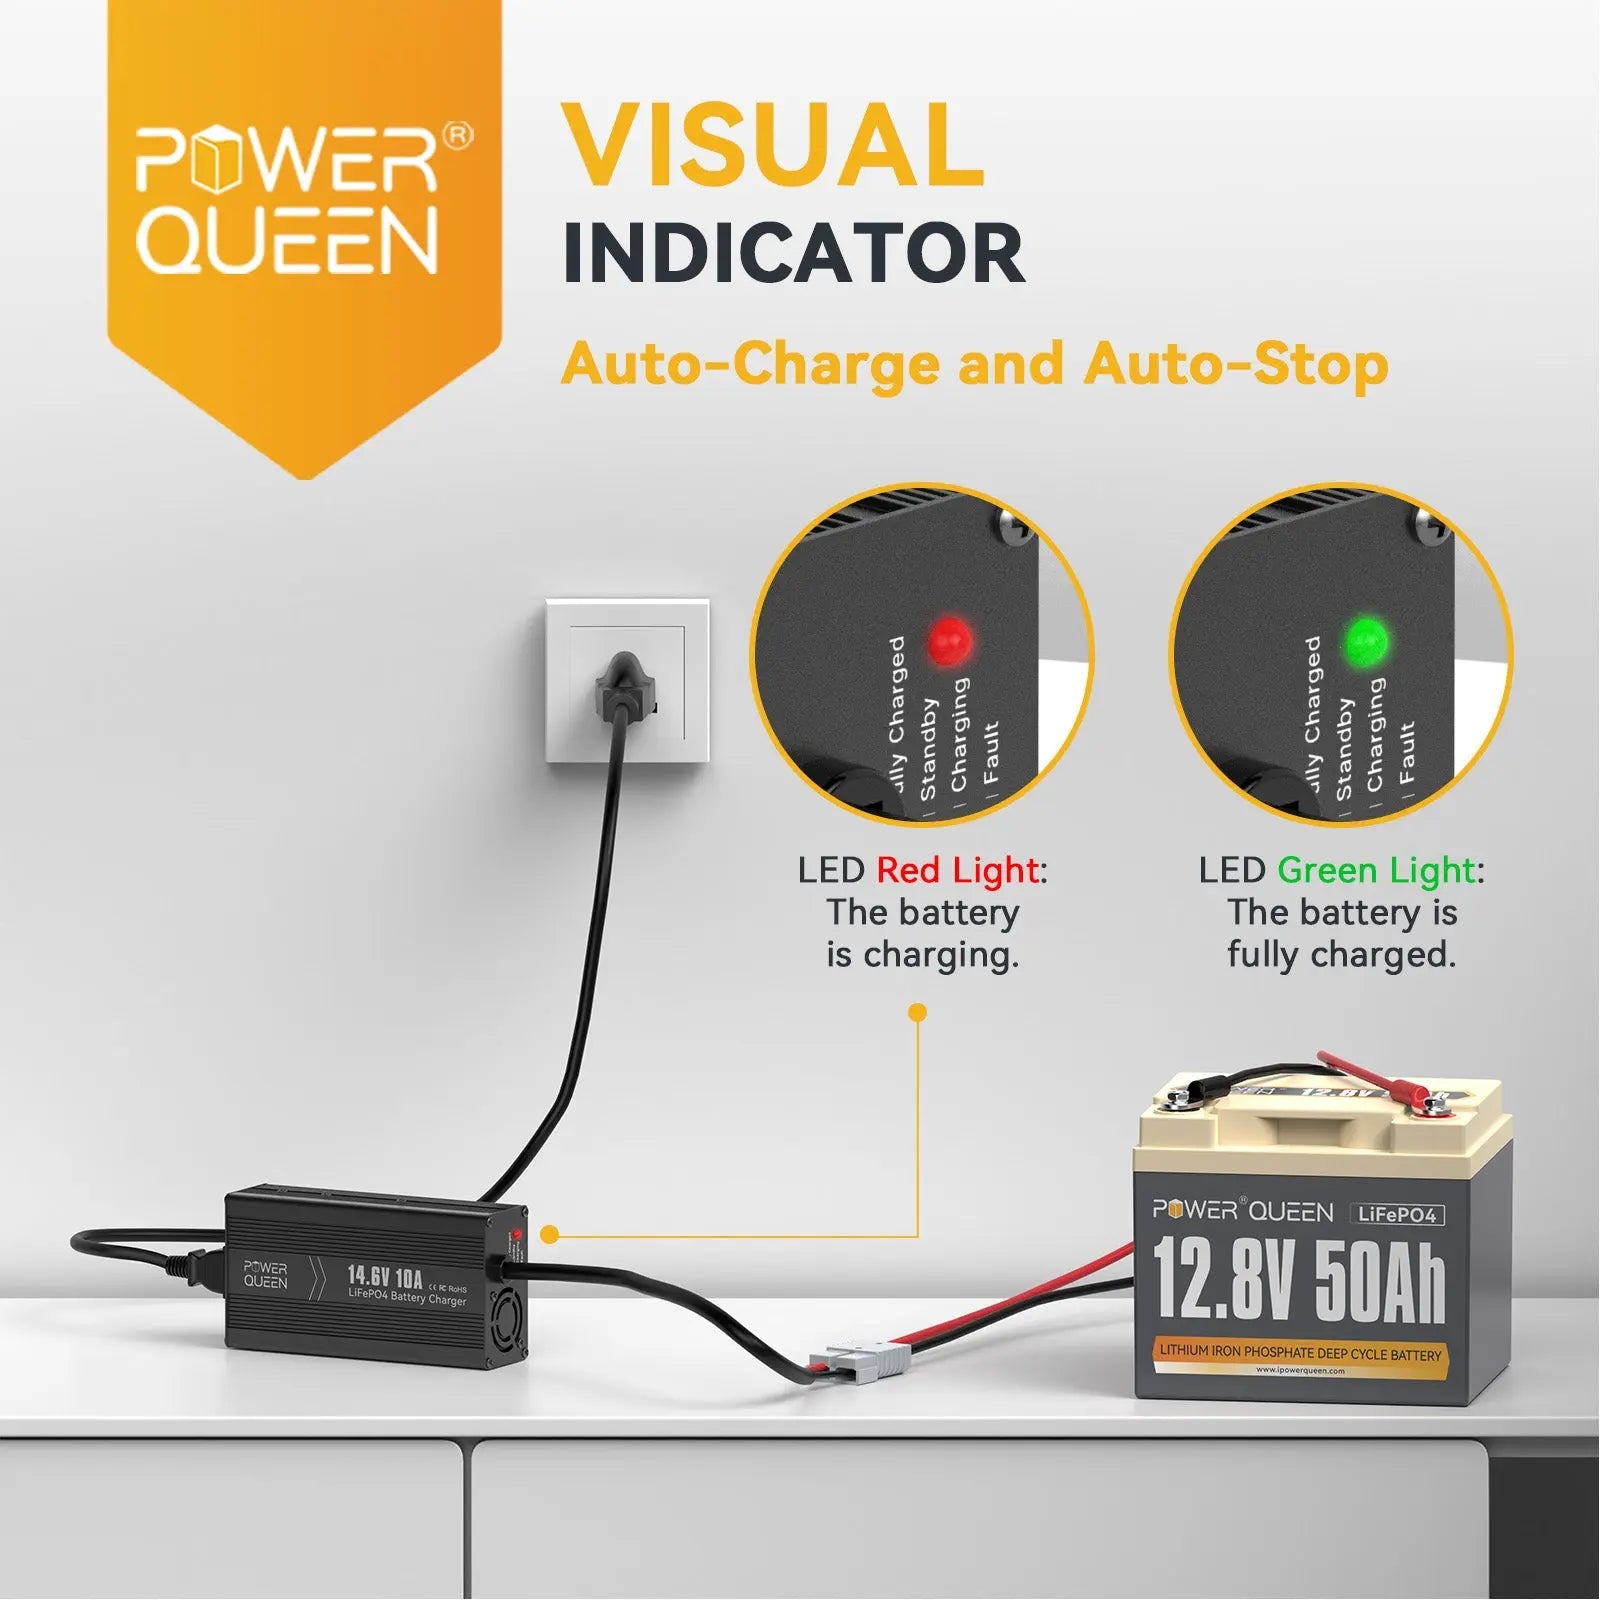 Power Queen 14.6V 10A LiFePO4 Battery Charger Power Queen